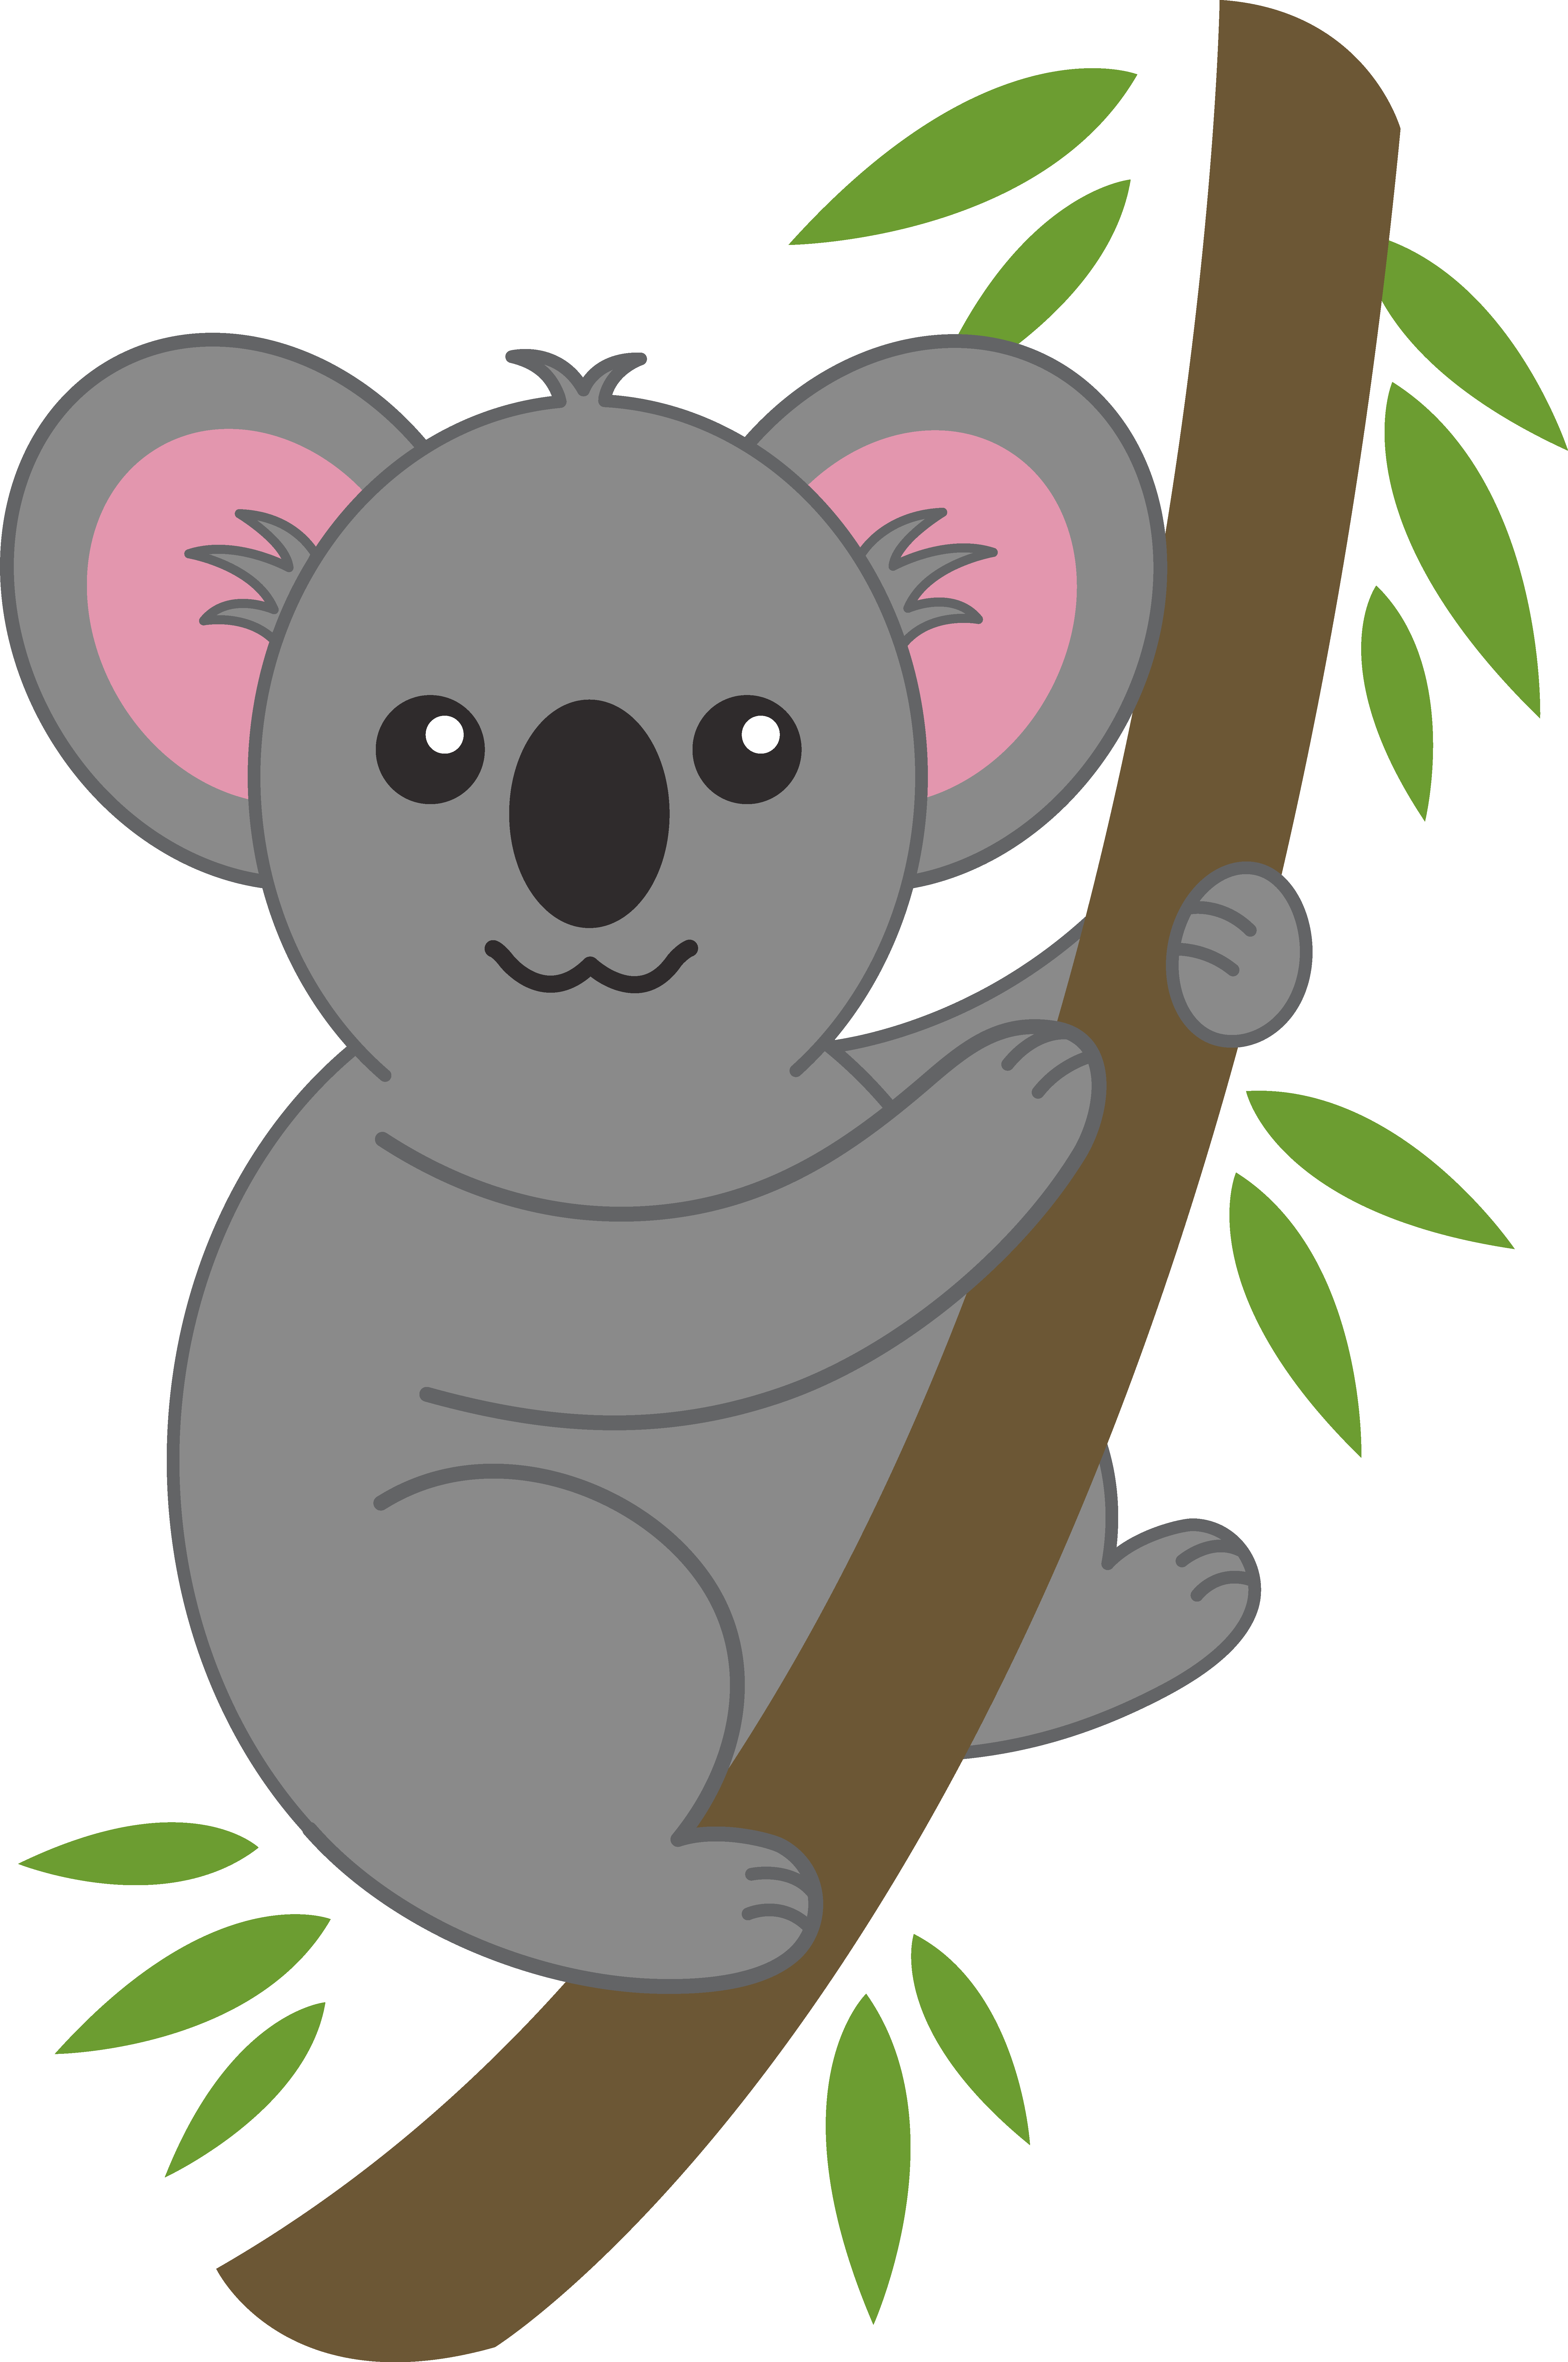 Free Cartoon Koala Picture, Download Free Clip Art, Free Clip Art on Clipart Library